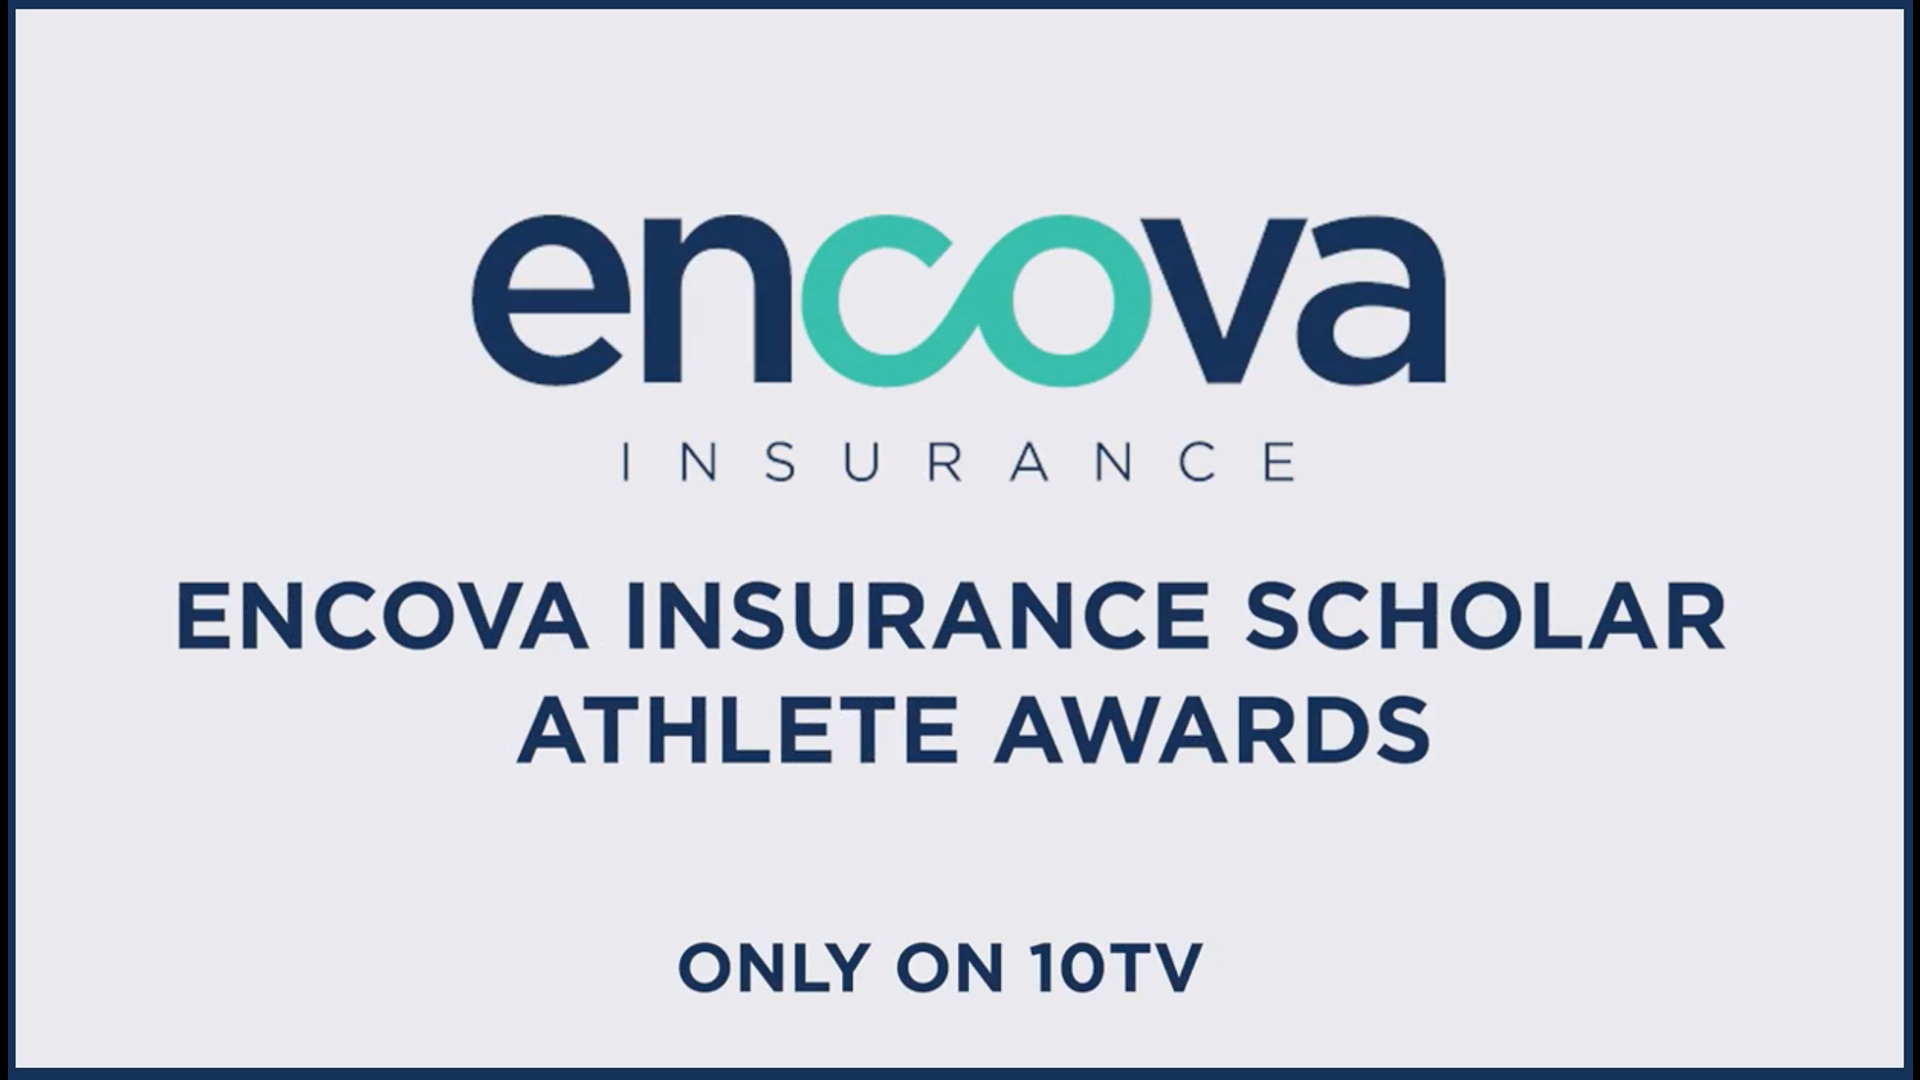 The Scholar Athlete Awards presented by Encova Insurance highlights the commitment of high school seniors to academics, athletics and community.